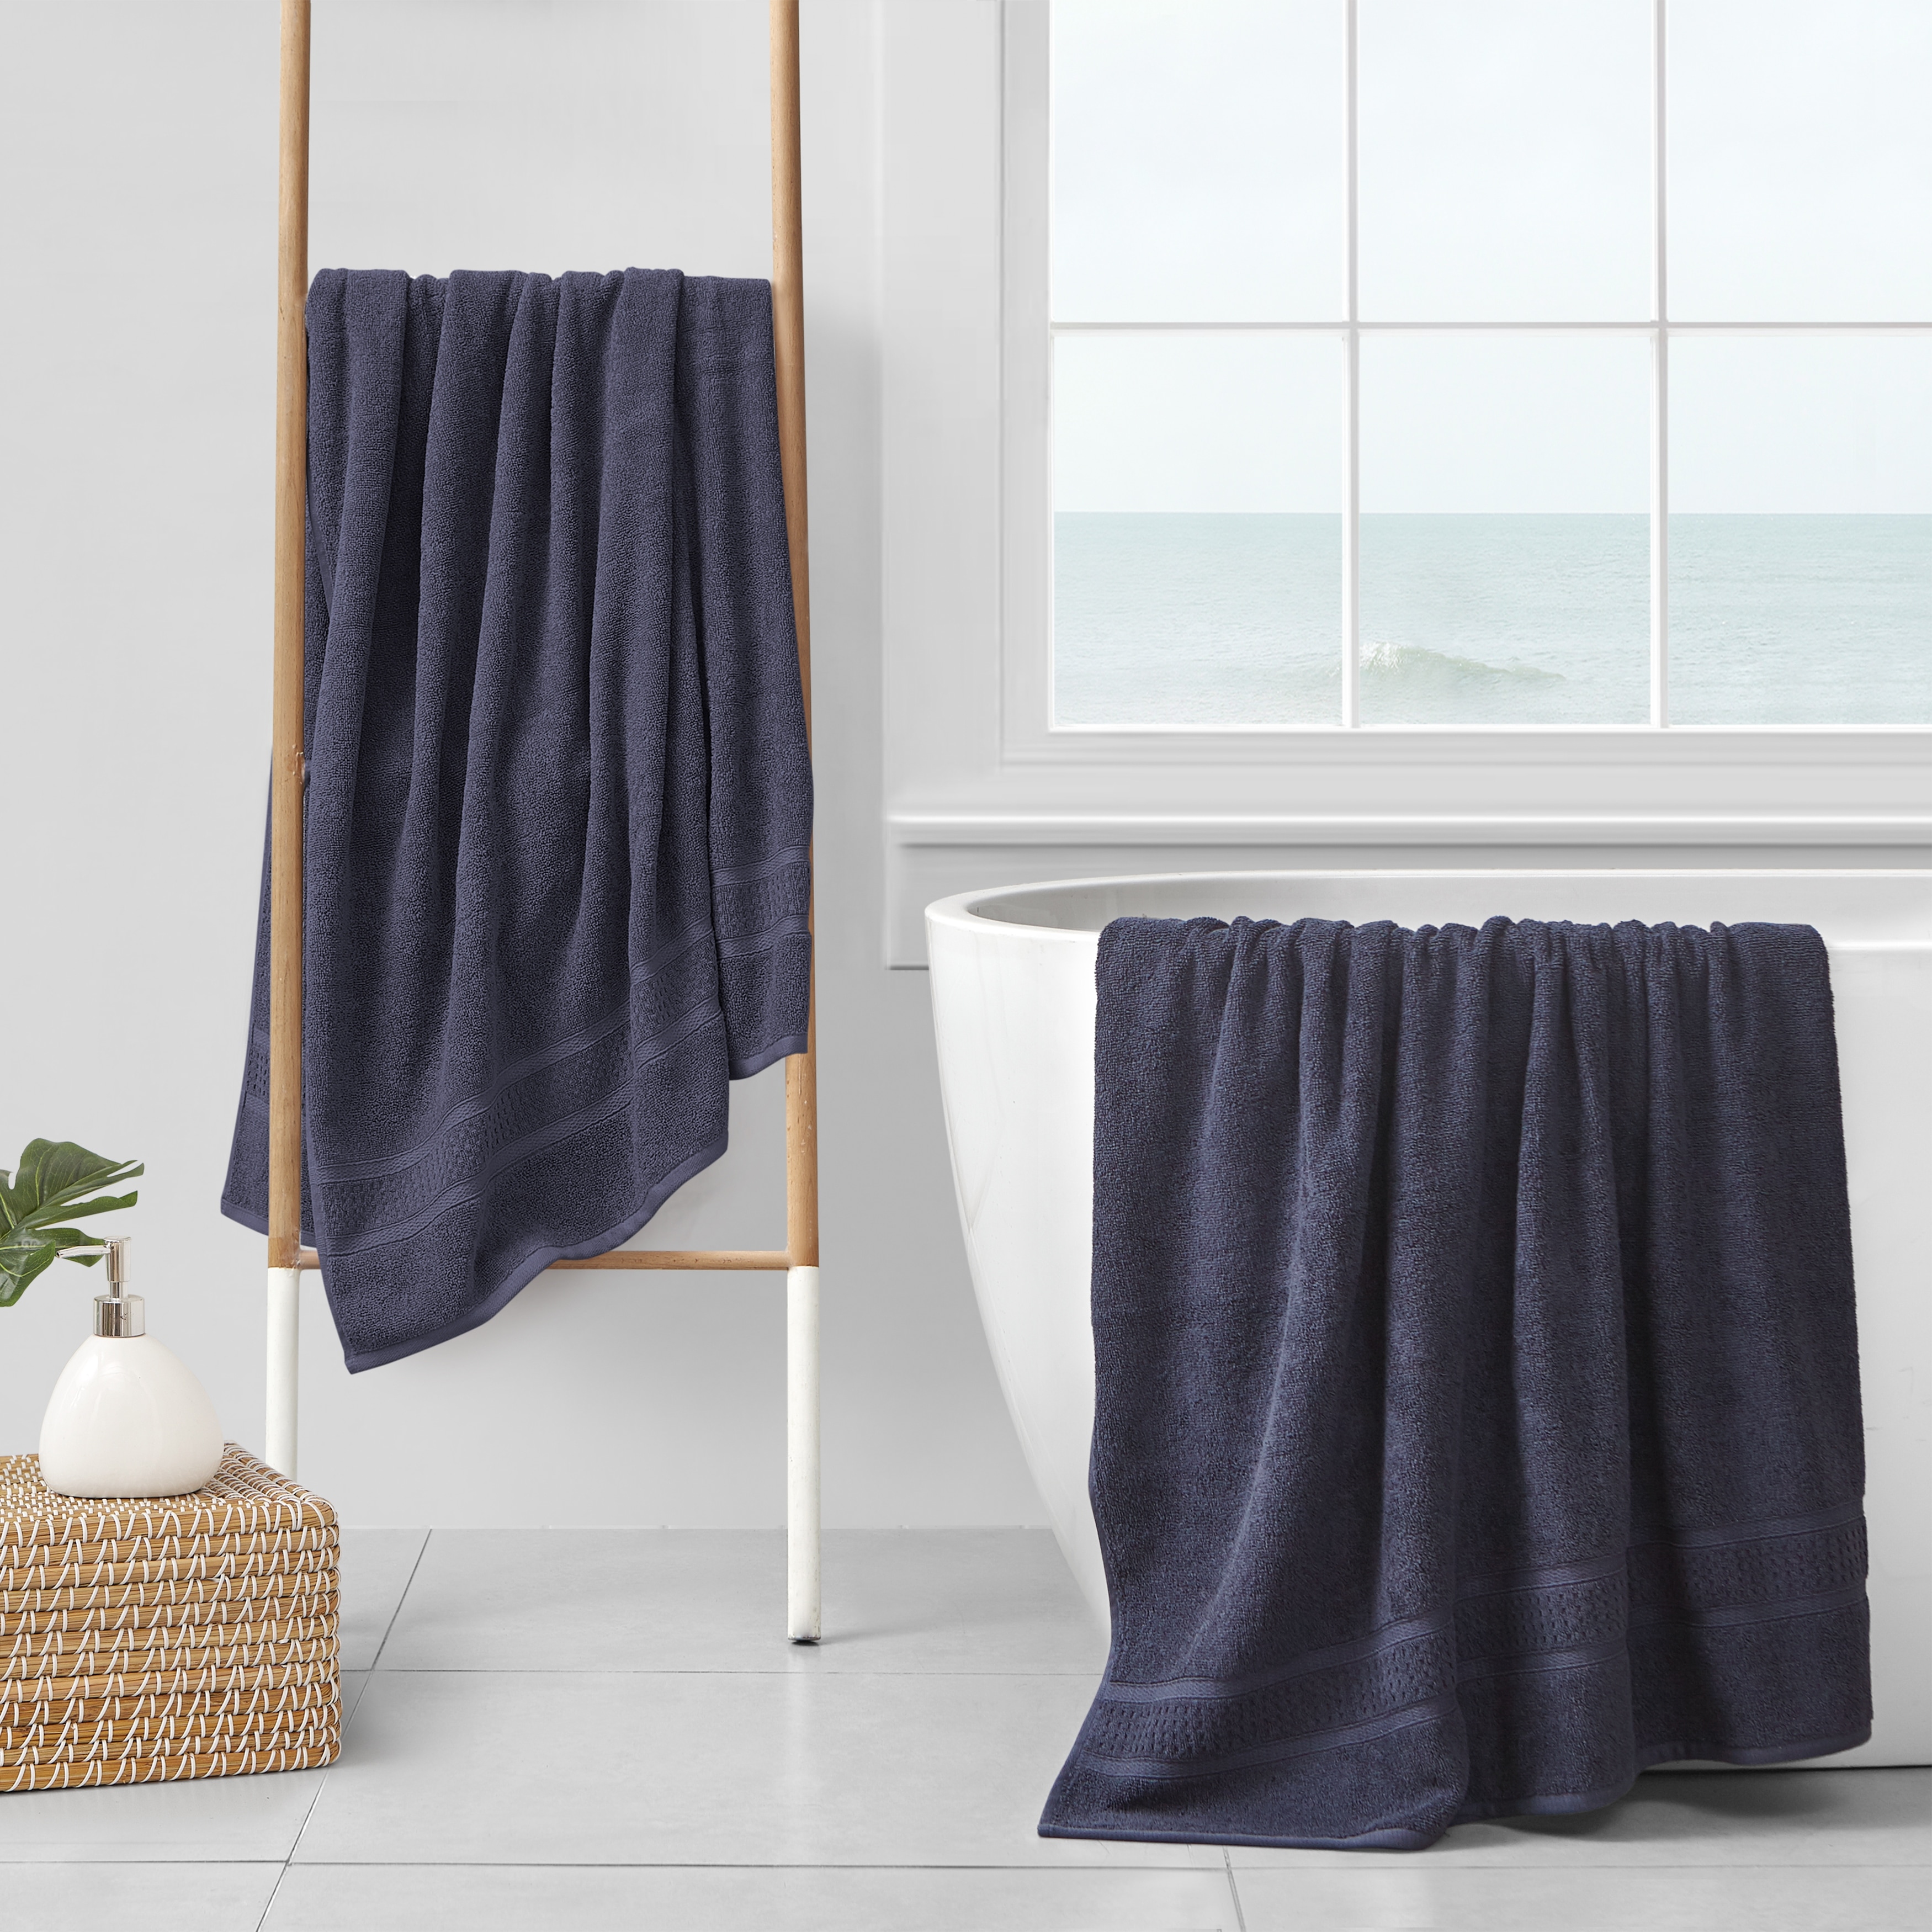 https://ak1.ostkcdn.com/images/products/is/images/direct/9df4918c37fd4206d3bf2a7dc8542ba80a310906/Nautica-Oceane-Solid-Wellness-Towel-Collection.jpg